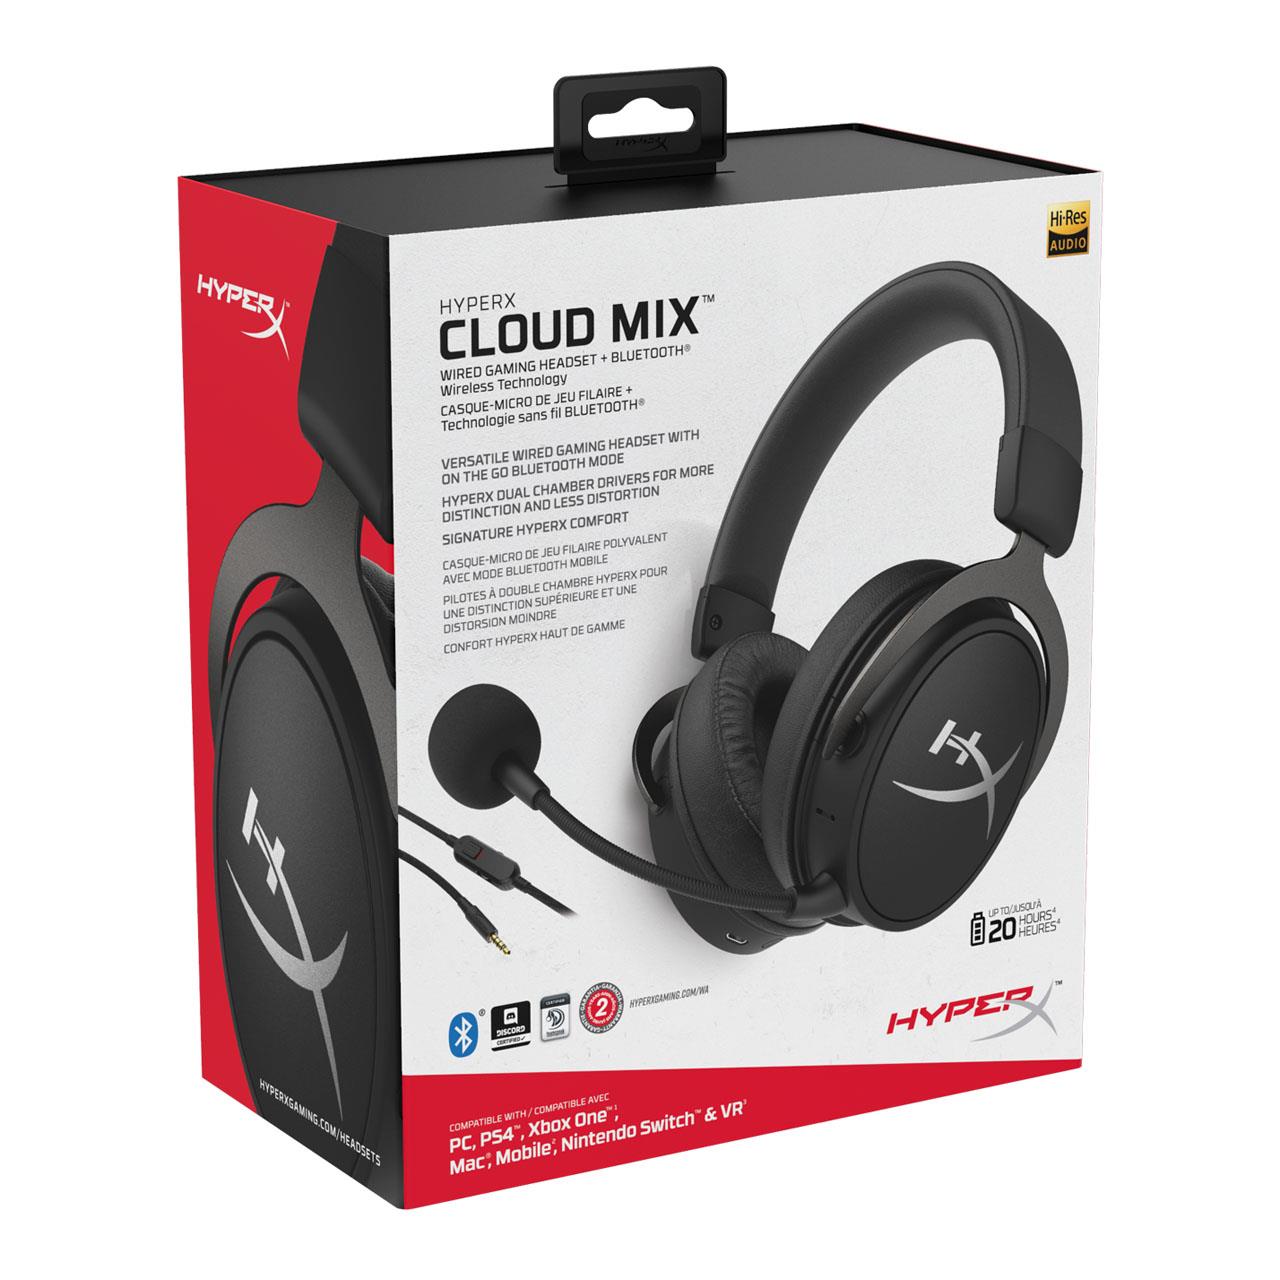 HyperX's new Cloud MIX headset works with Bluetooth devices as well ...